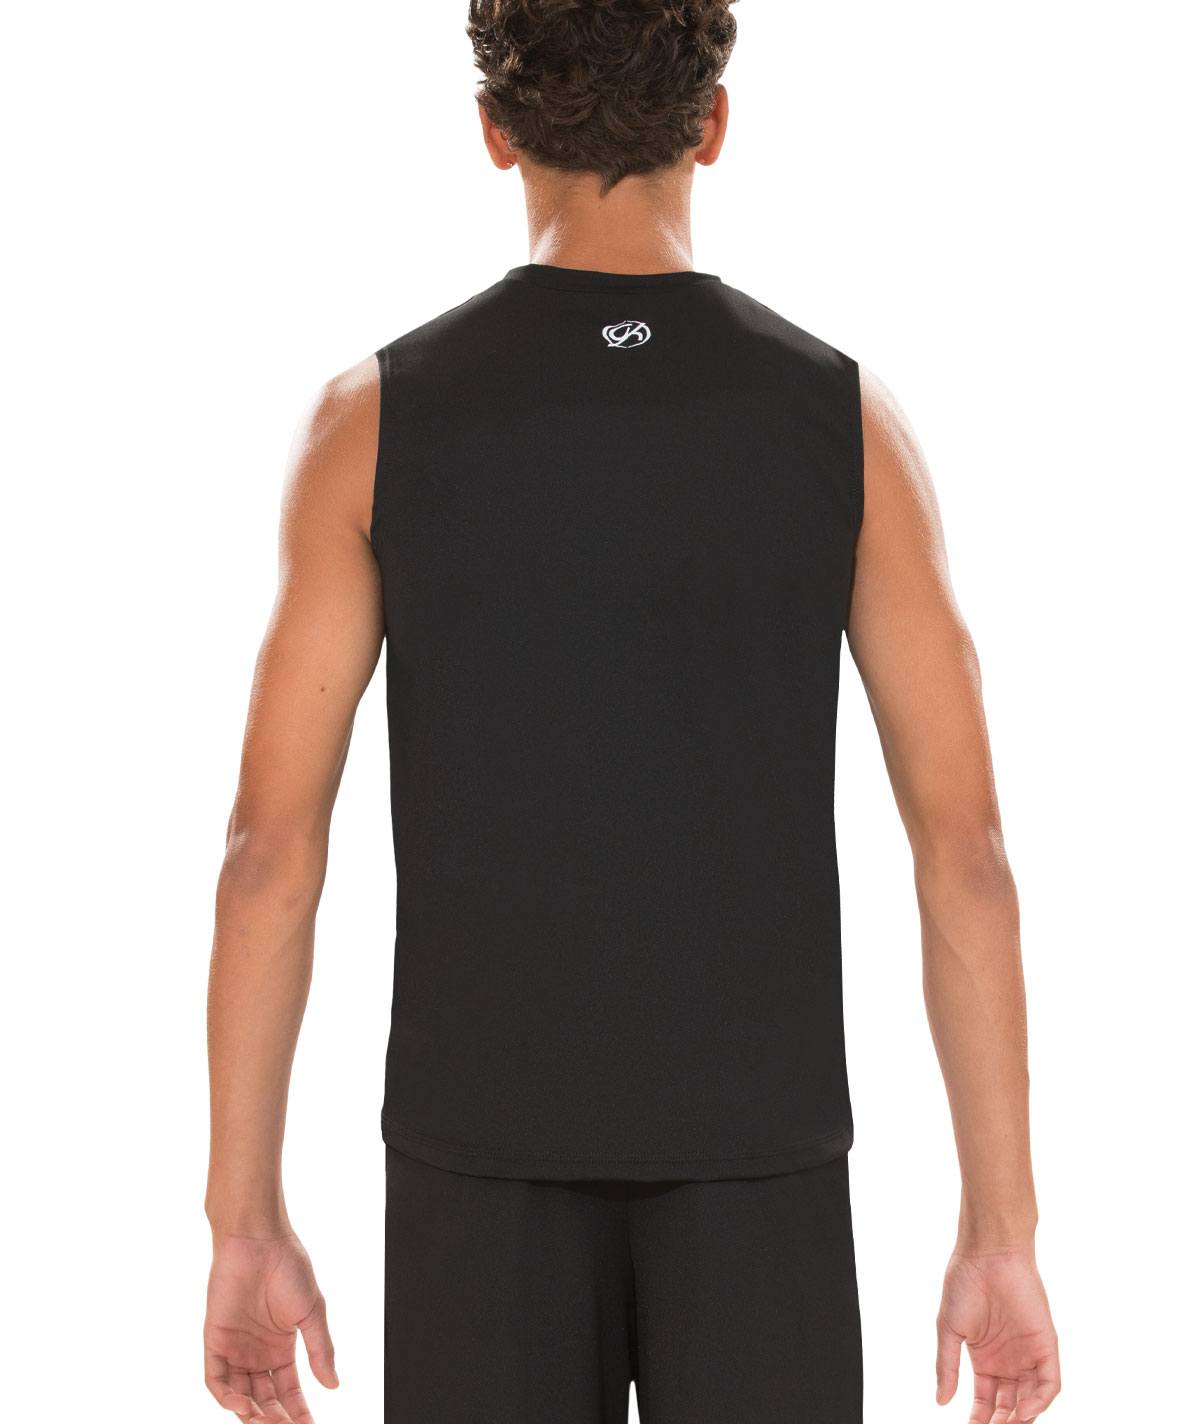 GK All Star Mens Relaxed Fit Sleeveless Cheer Top